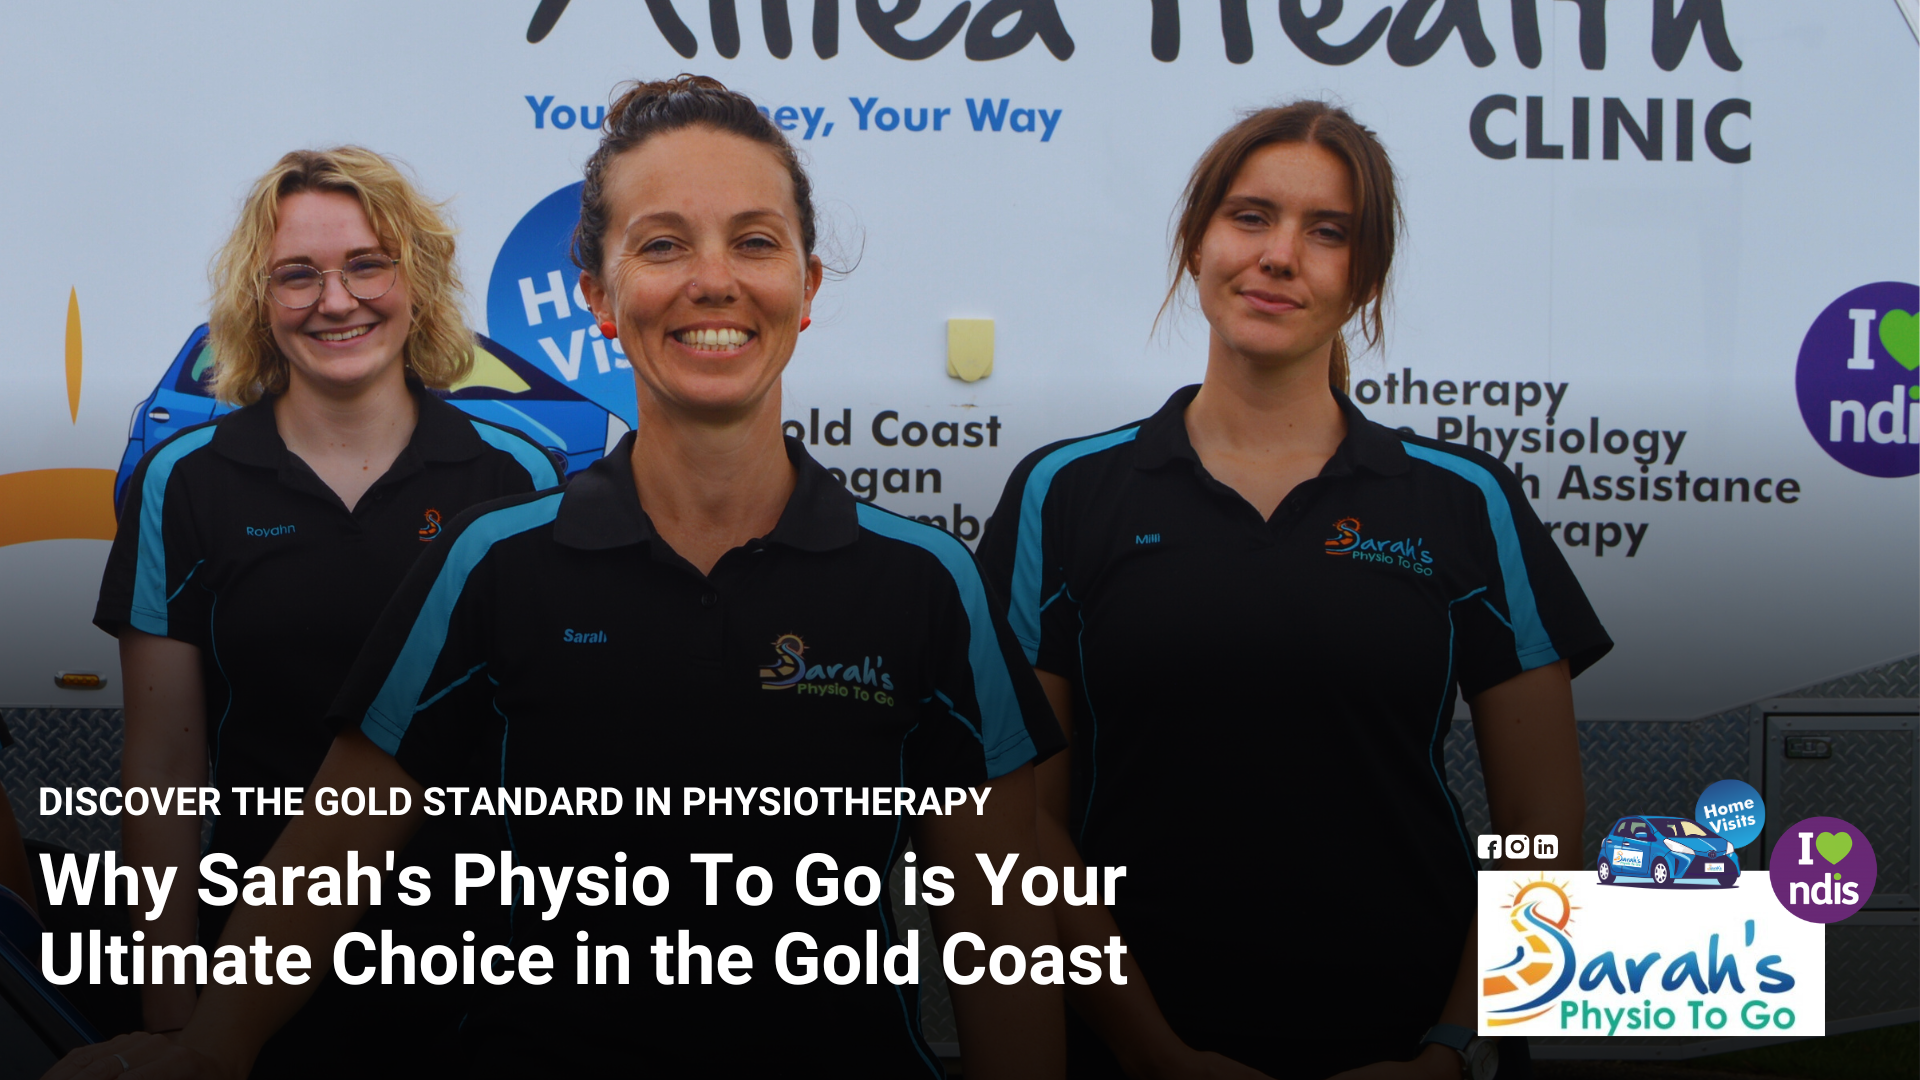 Discover the Gold Standard in Physiotherapy: Why Sarah’s Physio To Go is Your Ultimate Choice in the Gold Coast